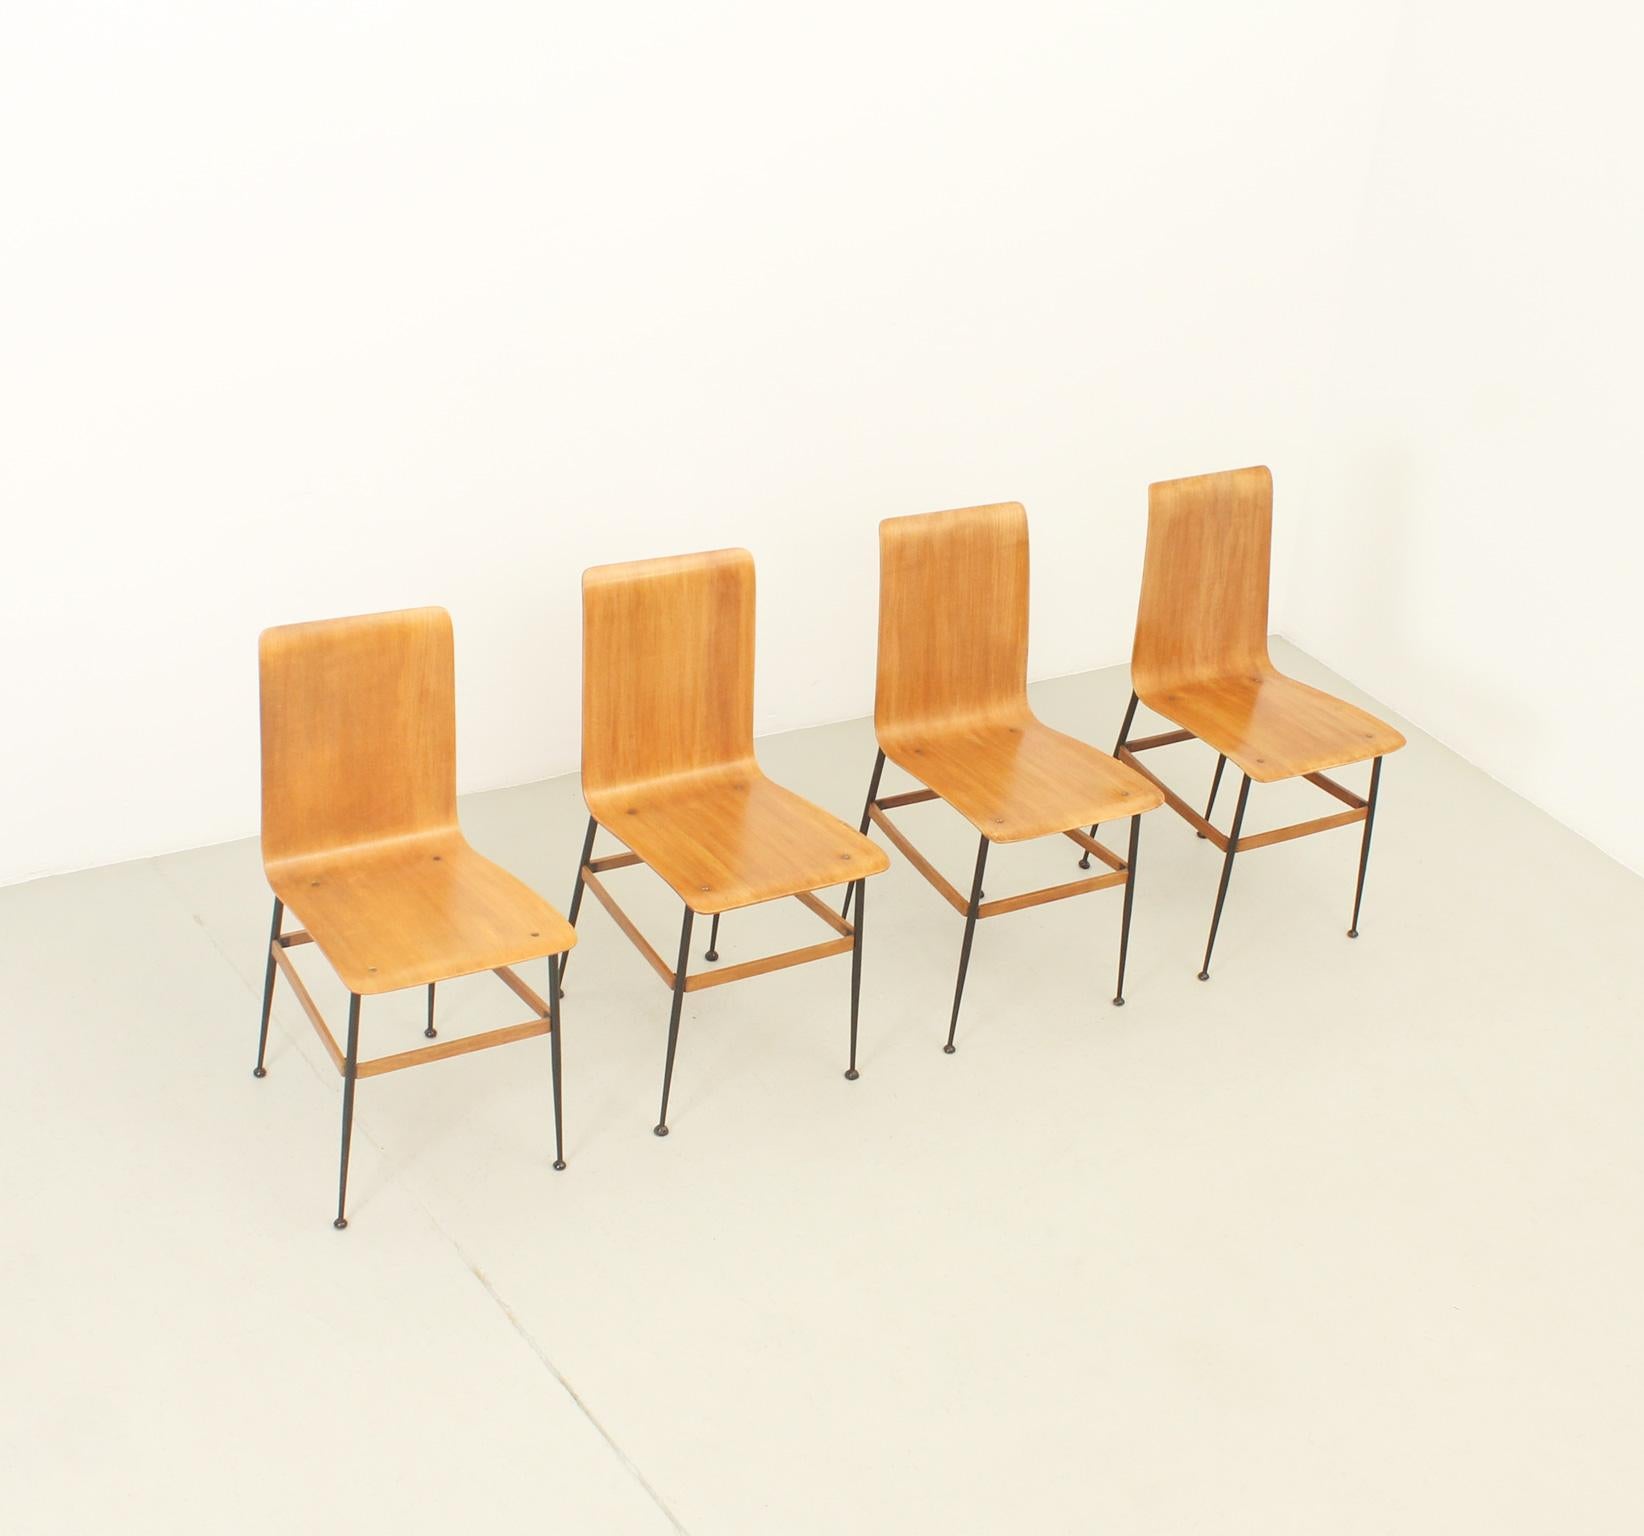 Plywood Dining Chairs by Carlo Ratti, Italy, 1950s For Sale 7